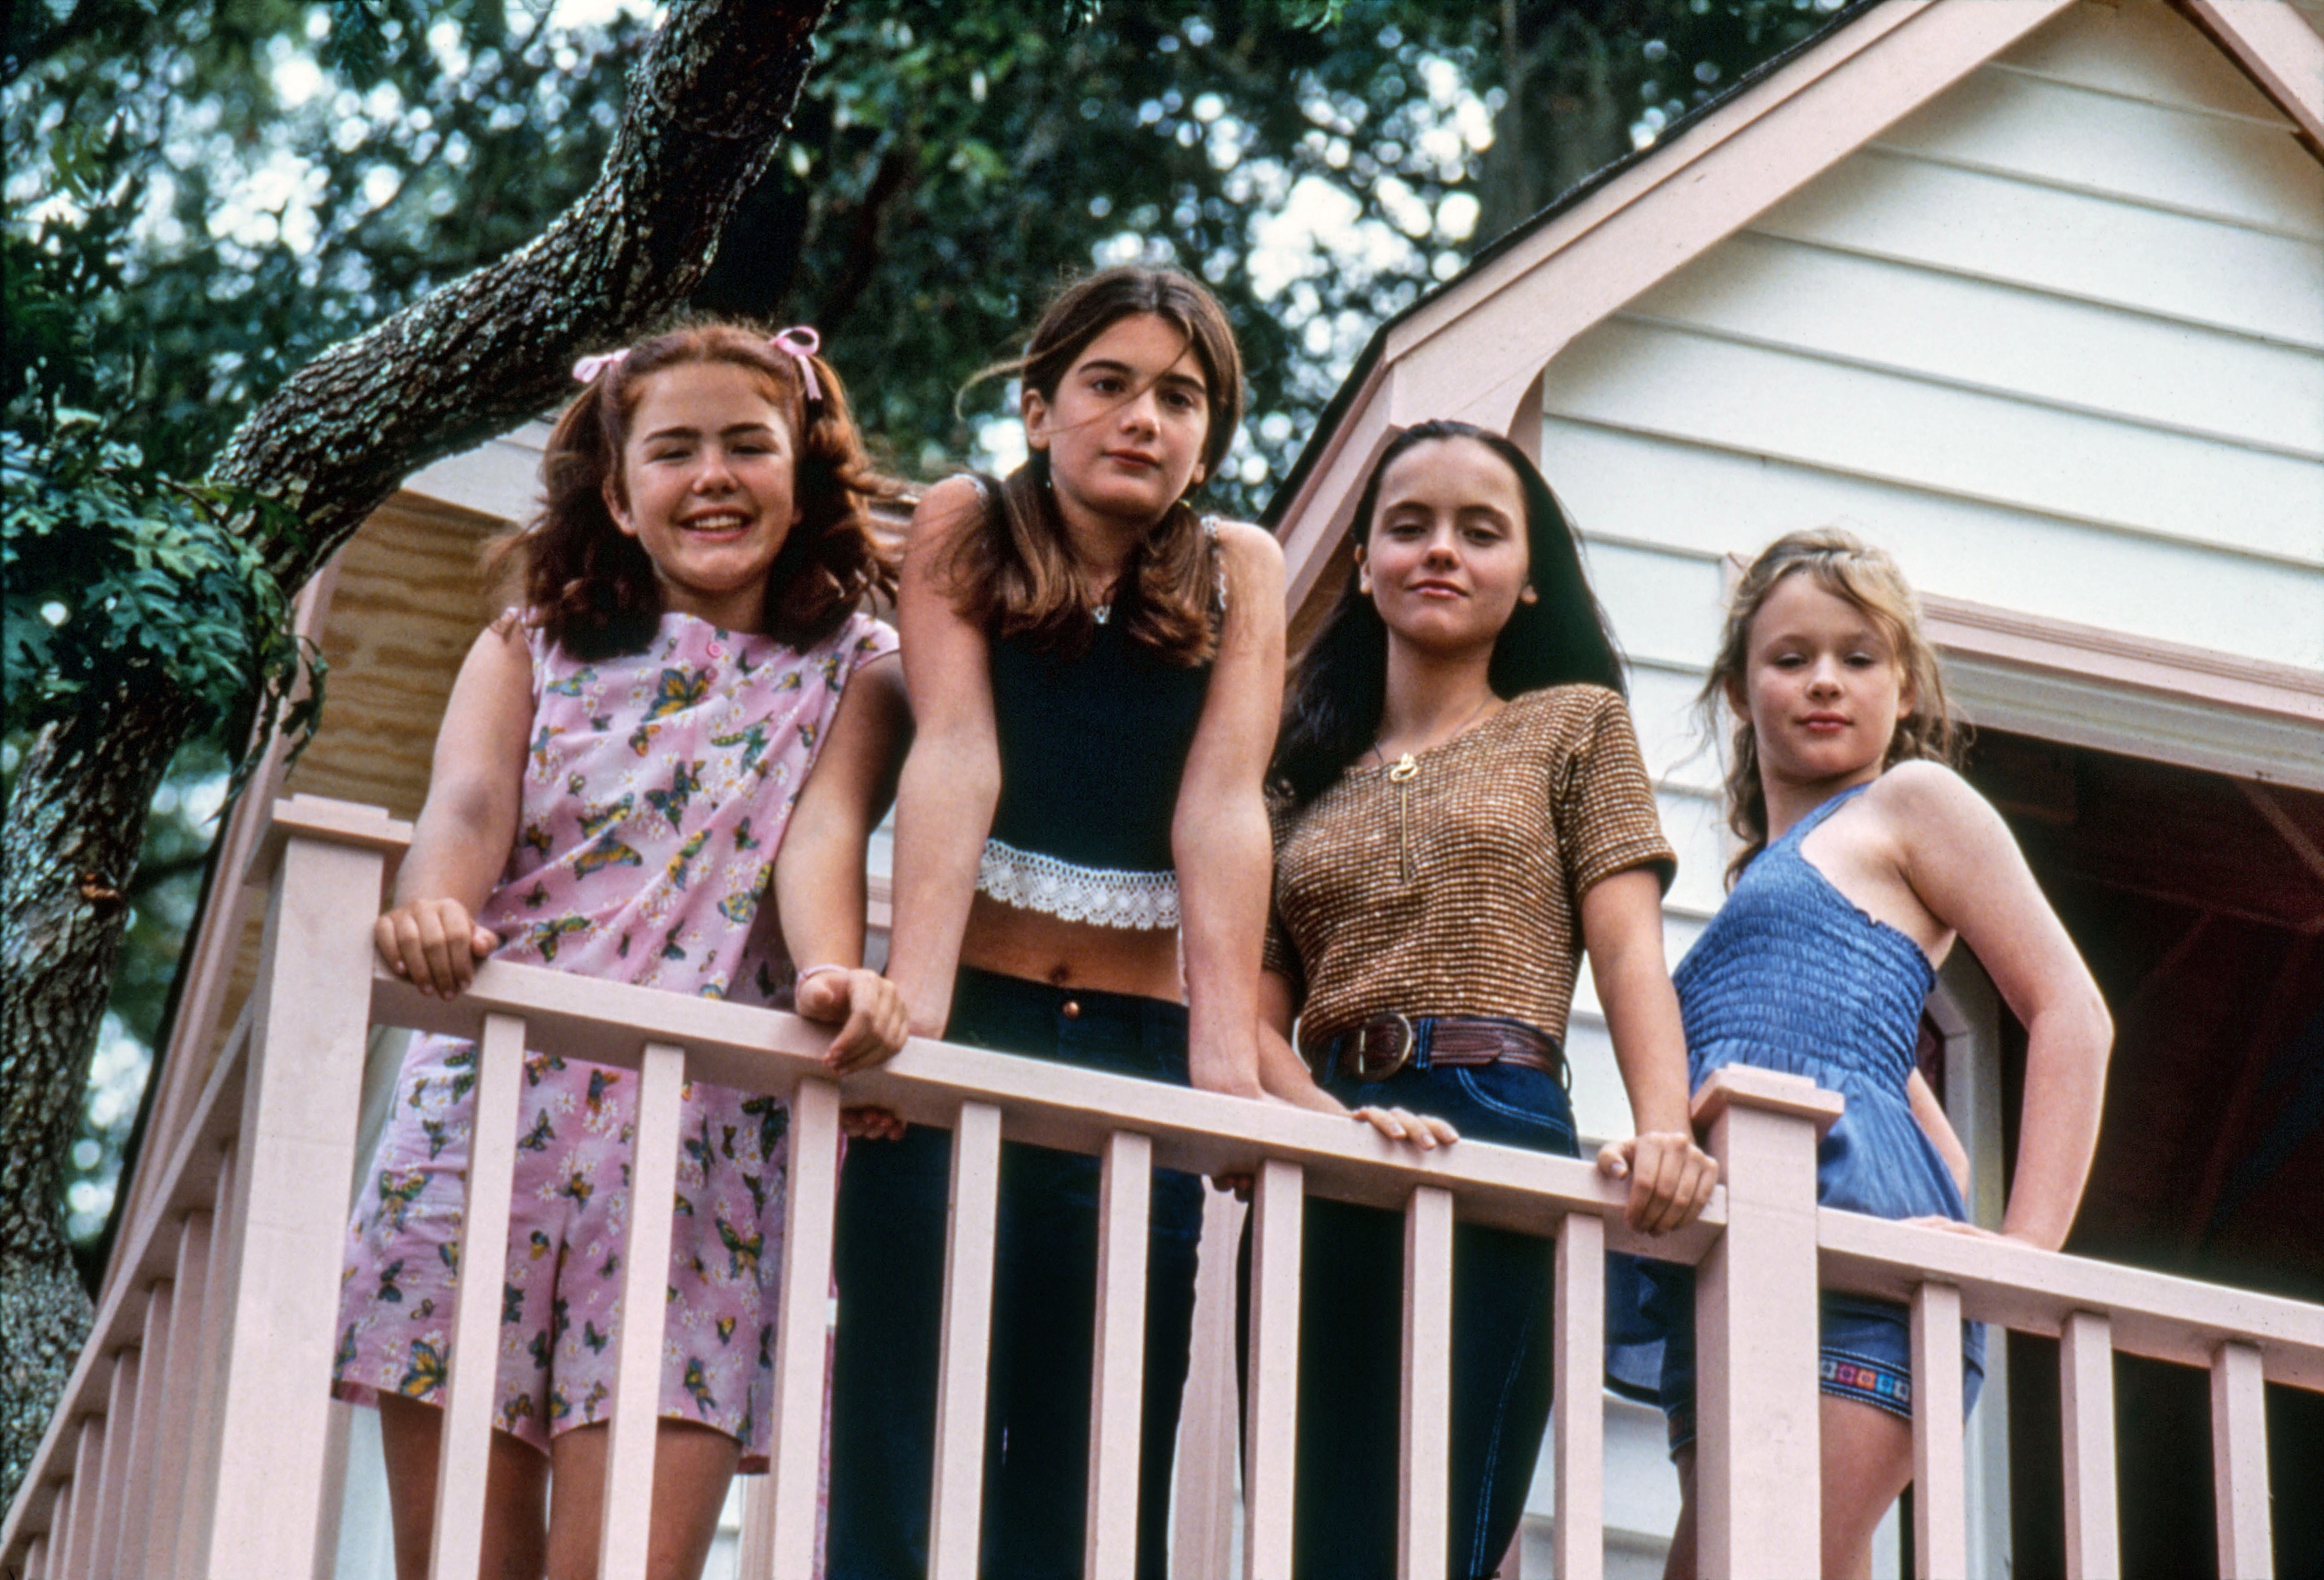 Four young girls stand on a treehouse balcony from the film &#x27;Now and Then.&#x27;